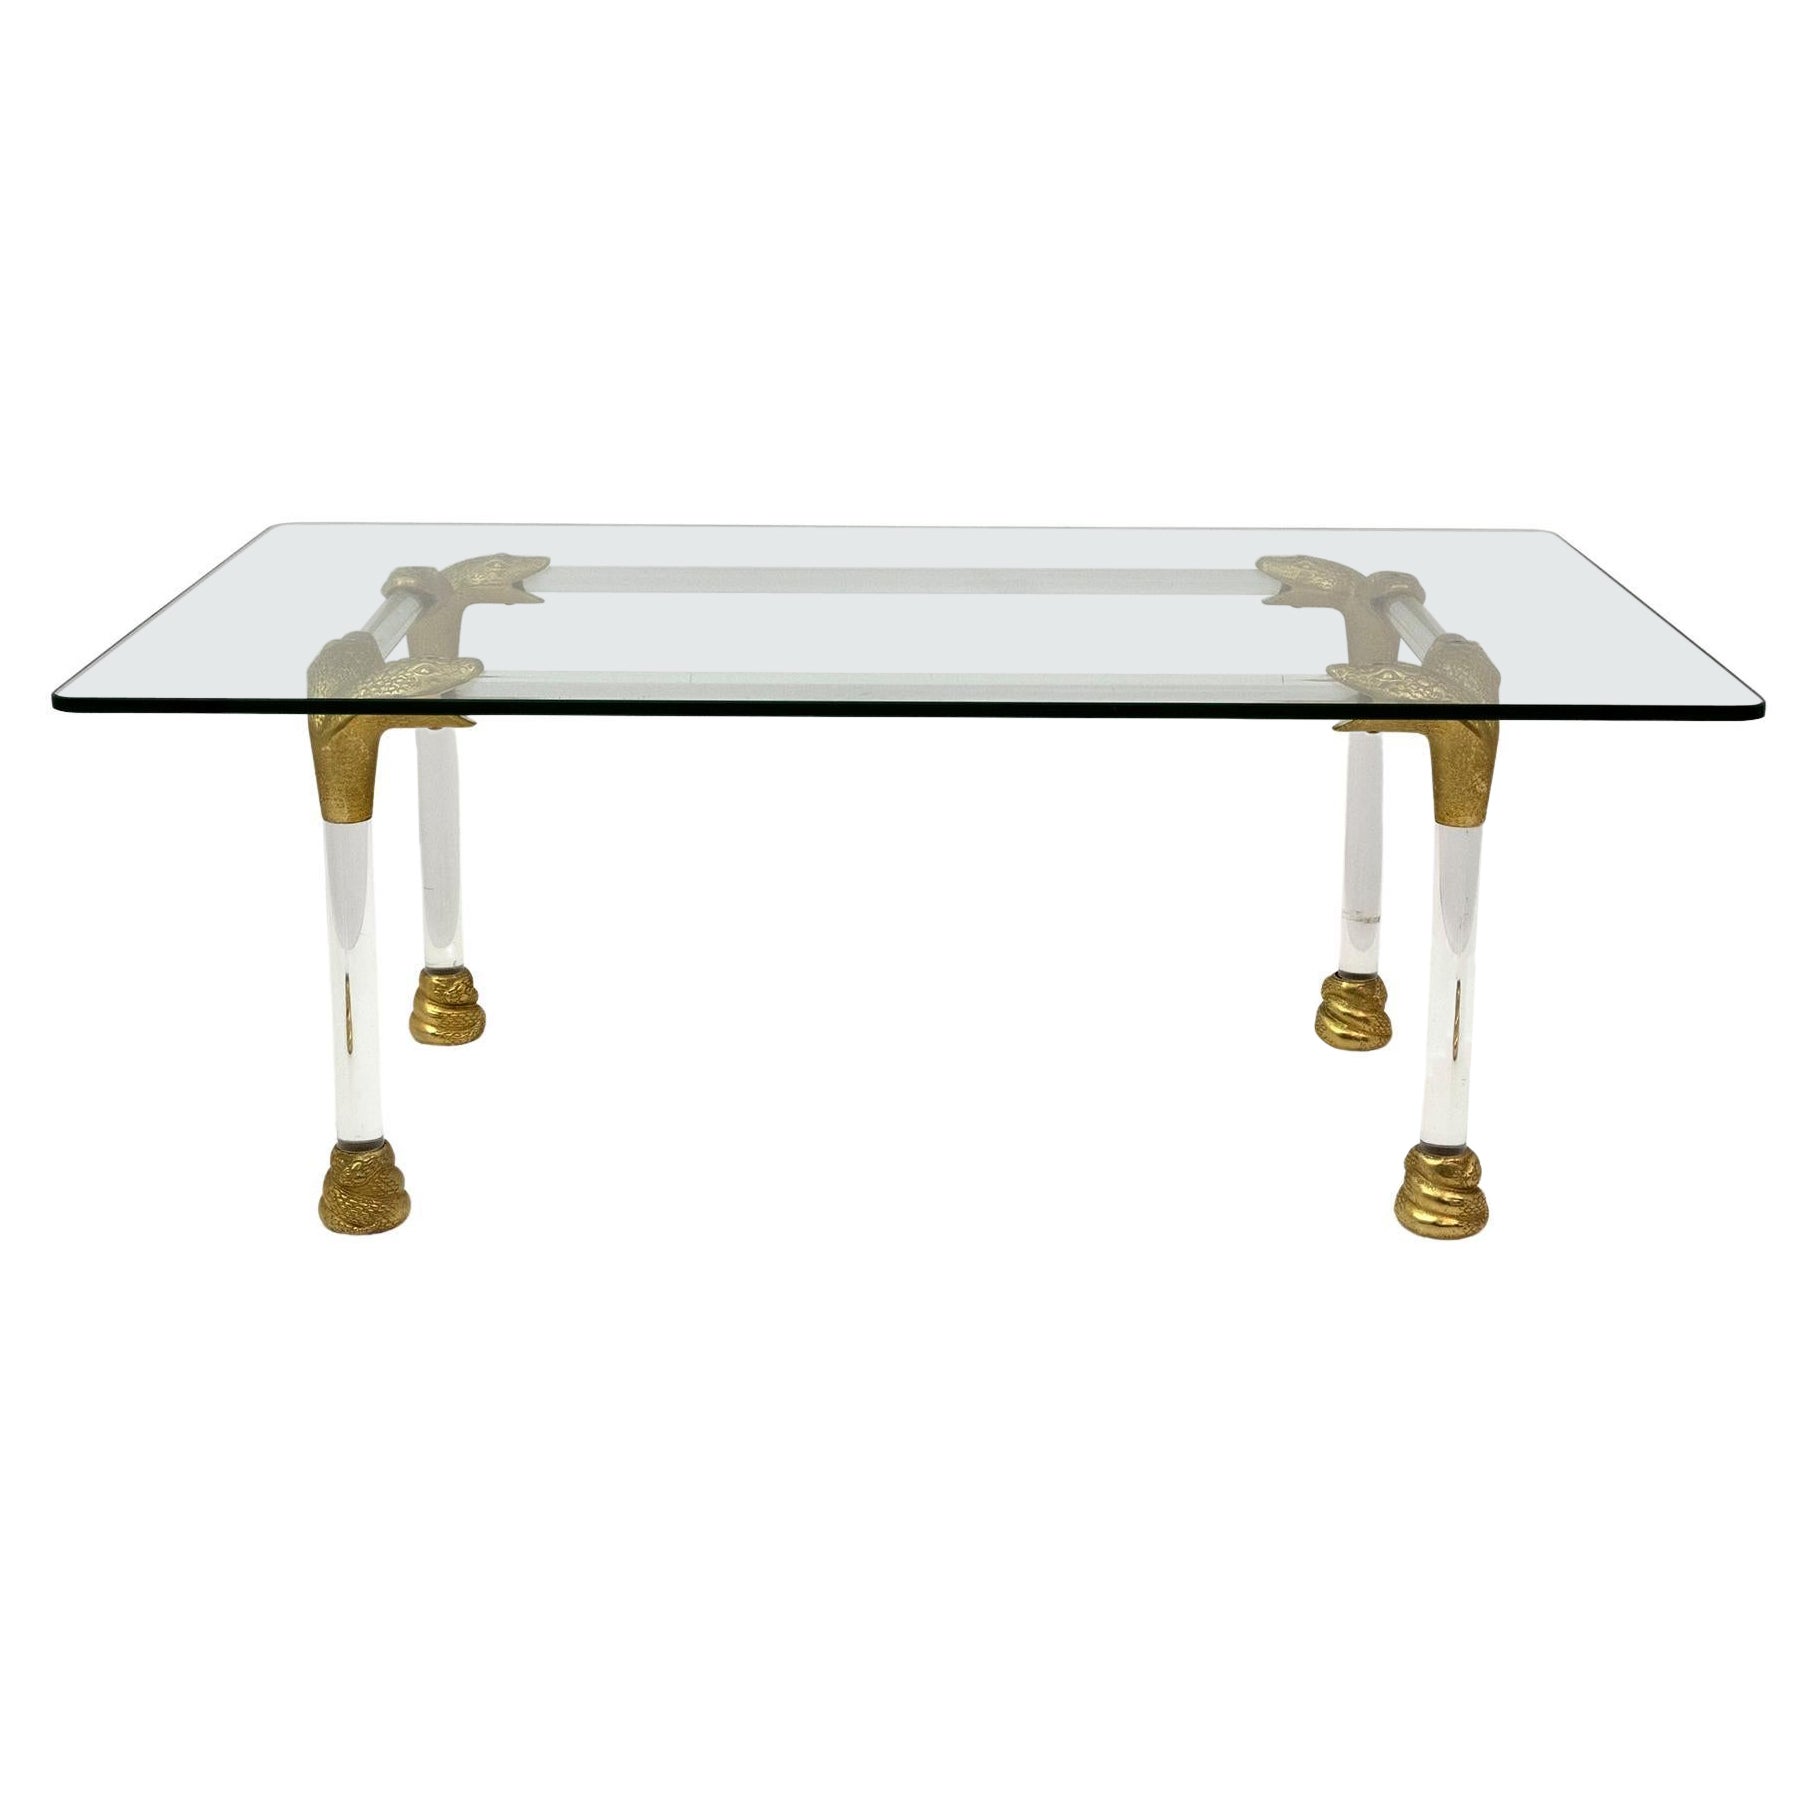 Mid-Century Lucite and Brass Italian Coffee Table with Snake Head Details, 1970s For Sale